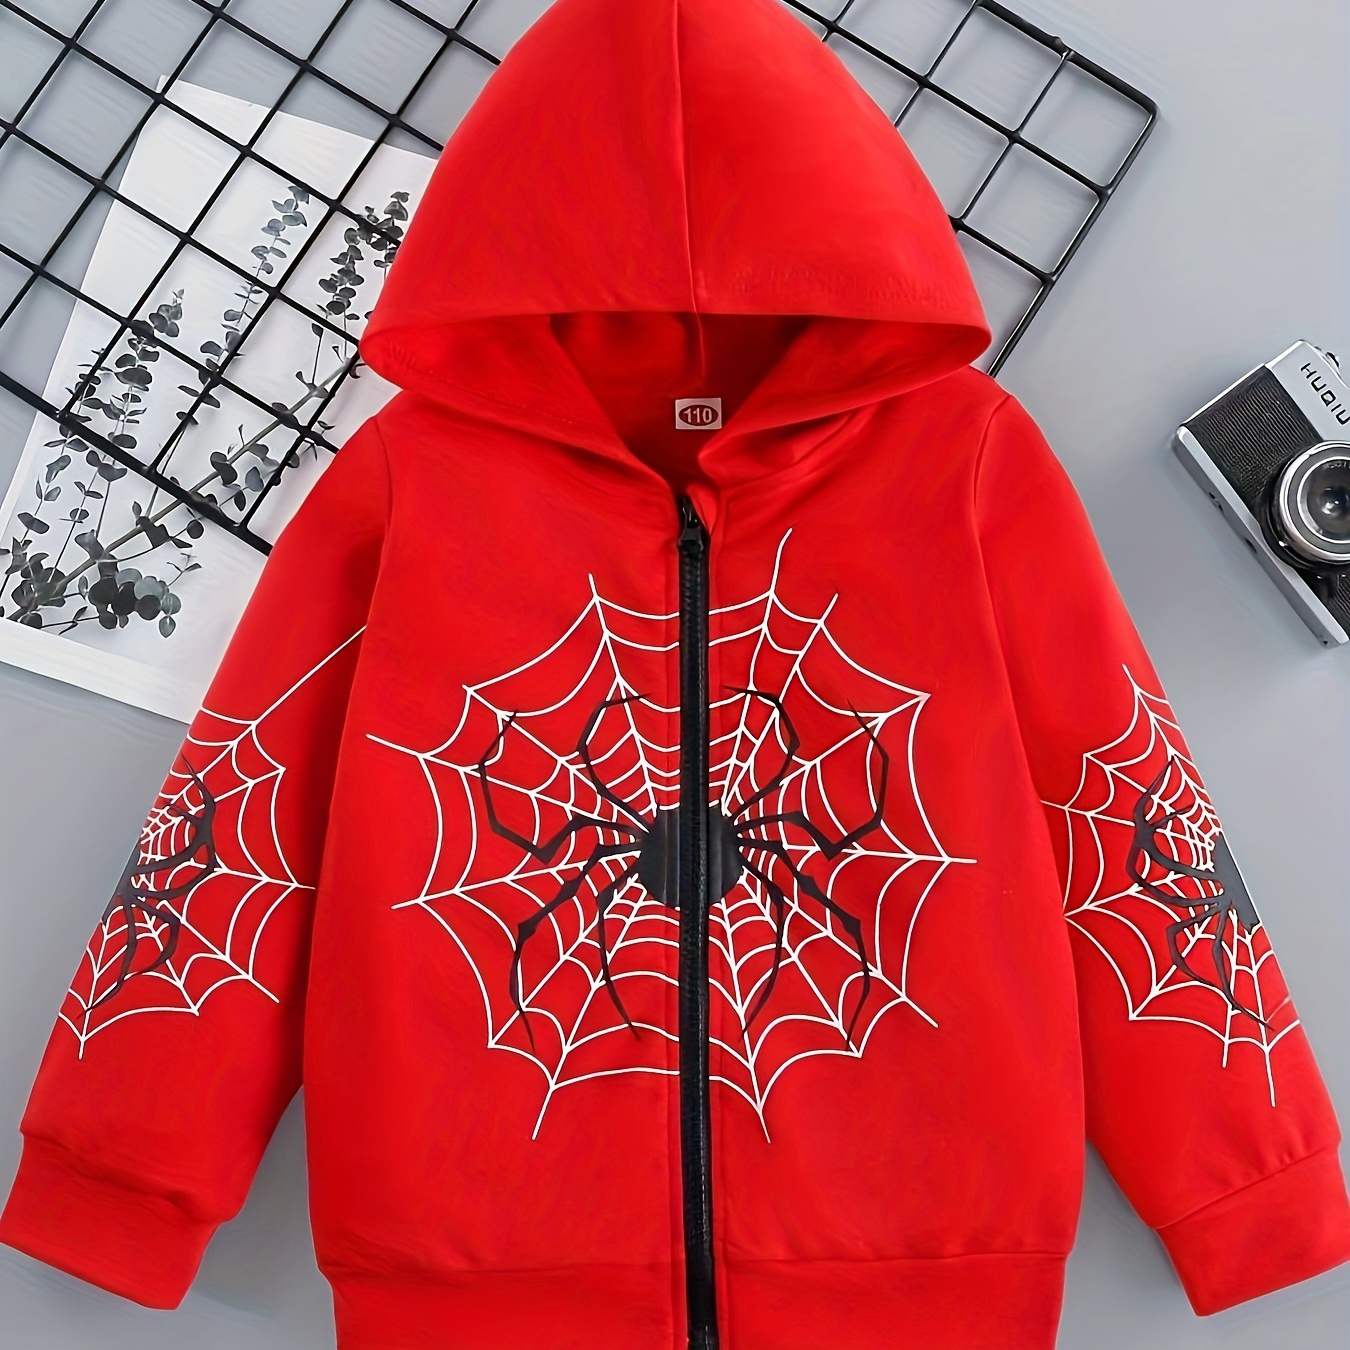 

Trendy Spider Graphic Print Boys Zip Up Hooded Sweatshirt Casual Long Sleeve Hoodies With Pockets Gym Sports Hooded Jacket